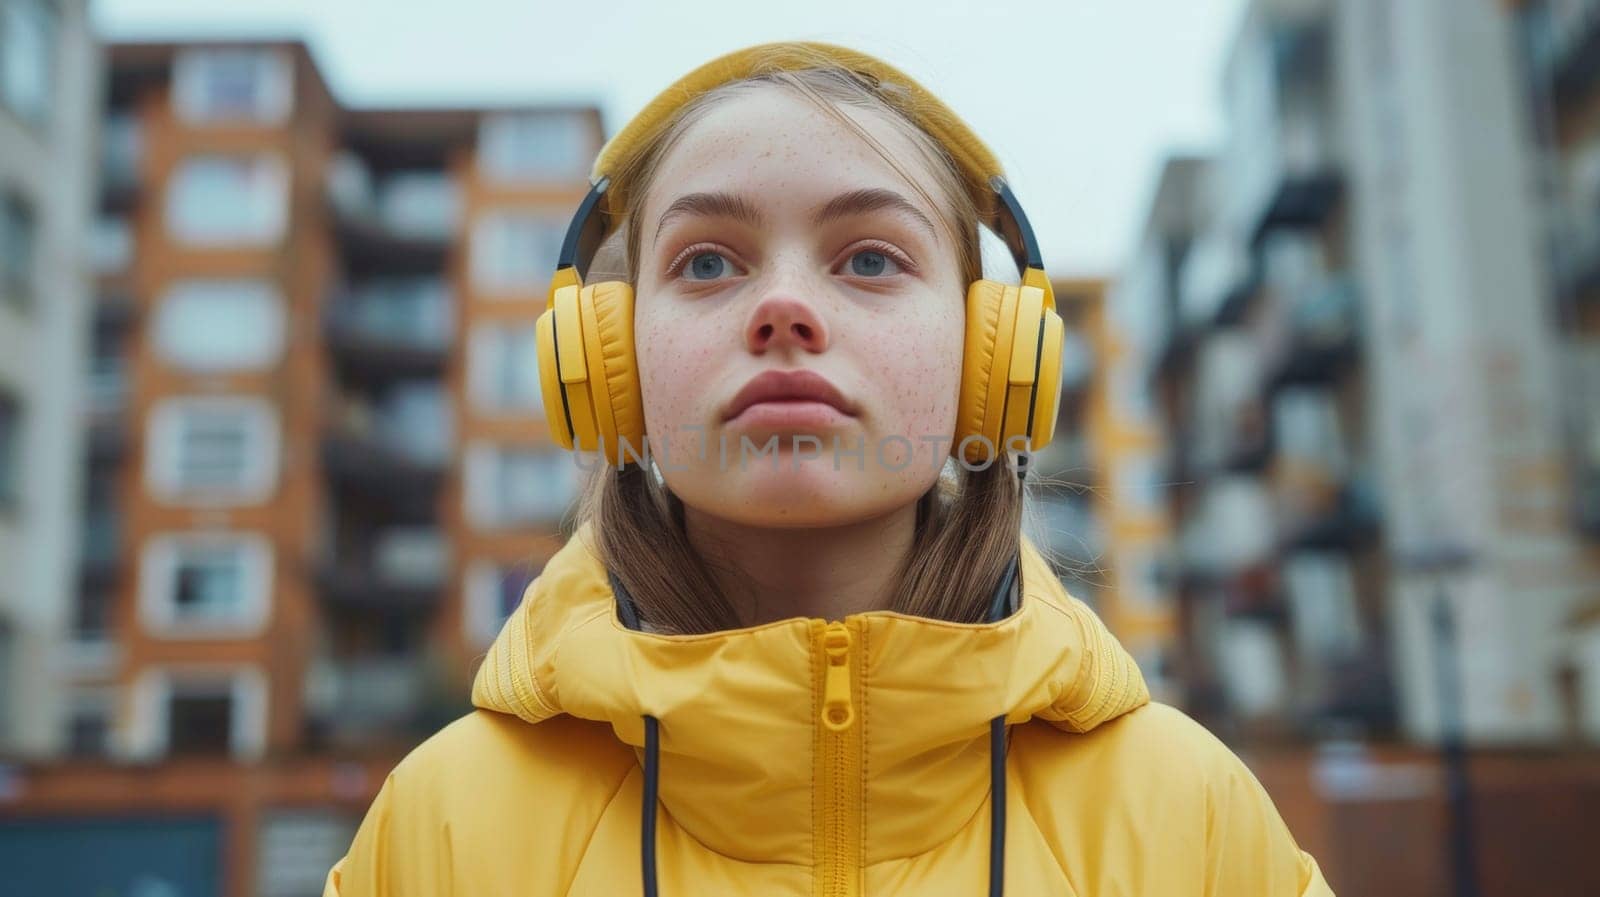 A young girl wearing yellow jacket with headphones on her head